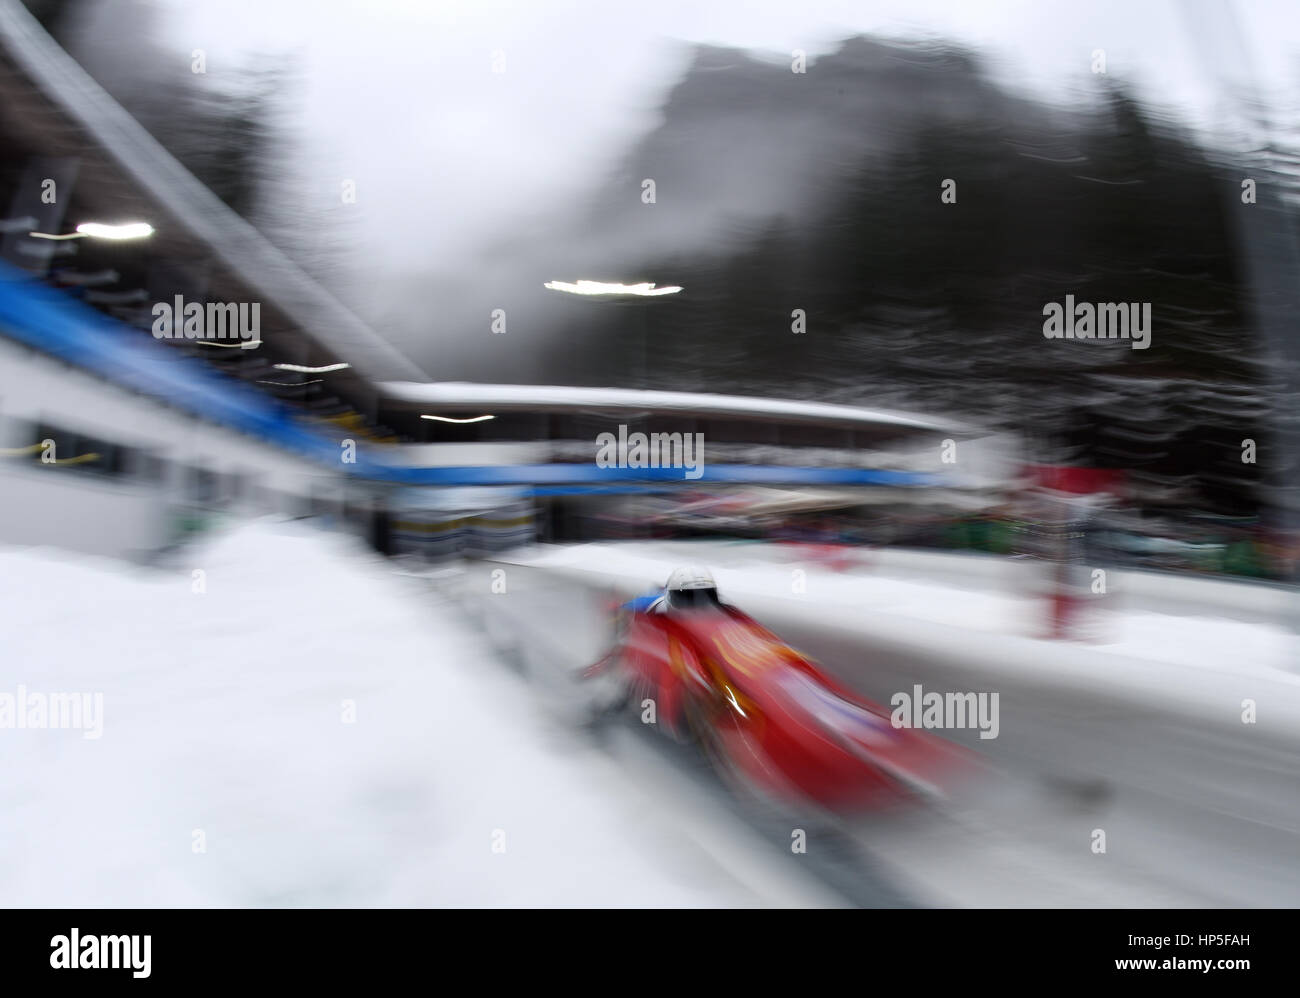 Schoenau Am Koenigssee, Germany. 18th Feb, 2017. The bobsleigh athletes Patrick Baumgartner and Constantino Ughi from Italy during the first round of the Bobsleigh and Skeleton World Championships in Schoenau Am Koenigssee, Germany, 18 February 2017. The world championships take place between the 13 and 26 February 2017. Photo: Angelika Warmuth/dpa/Alamy Live News Stock Photo